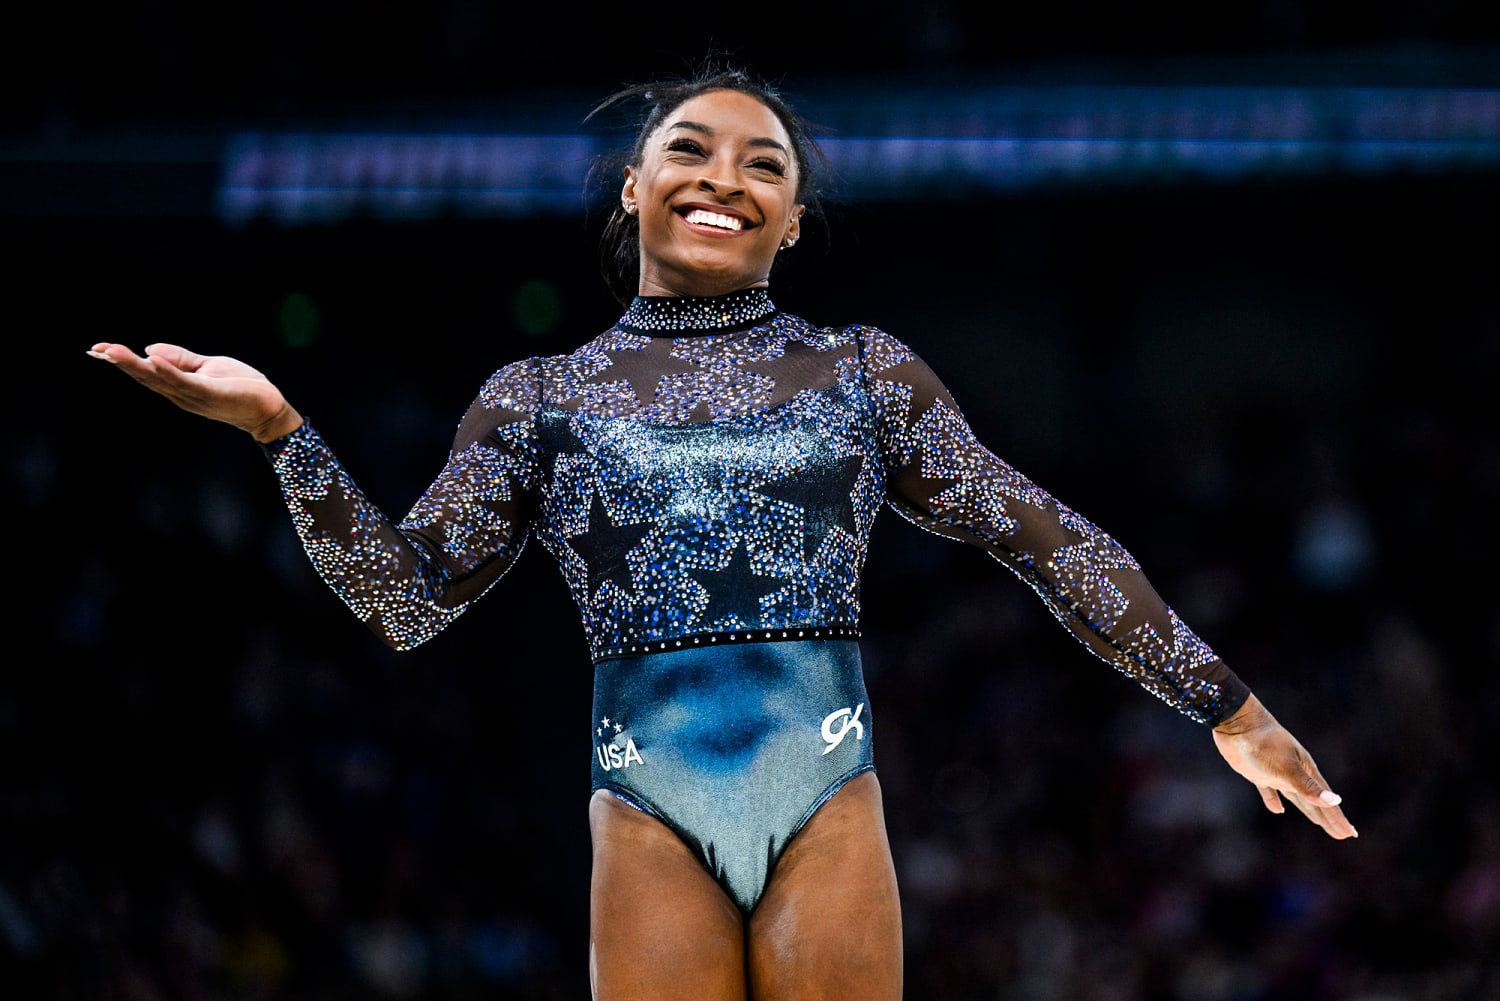 Simone Biles pushes through calf pain to qualify for five finals, U.S. women's team sits in first